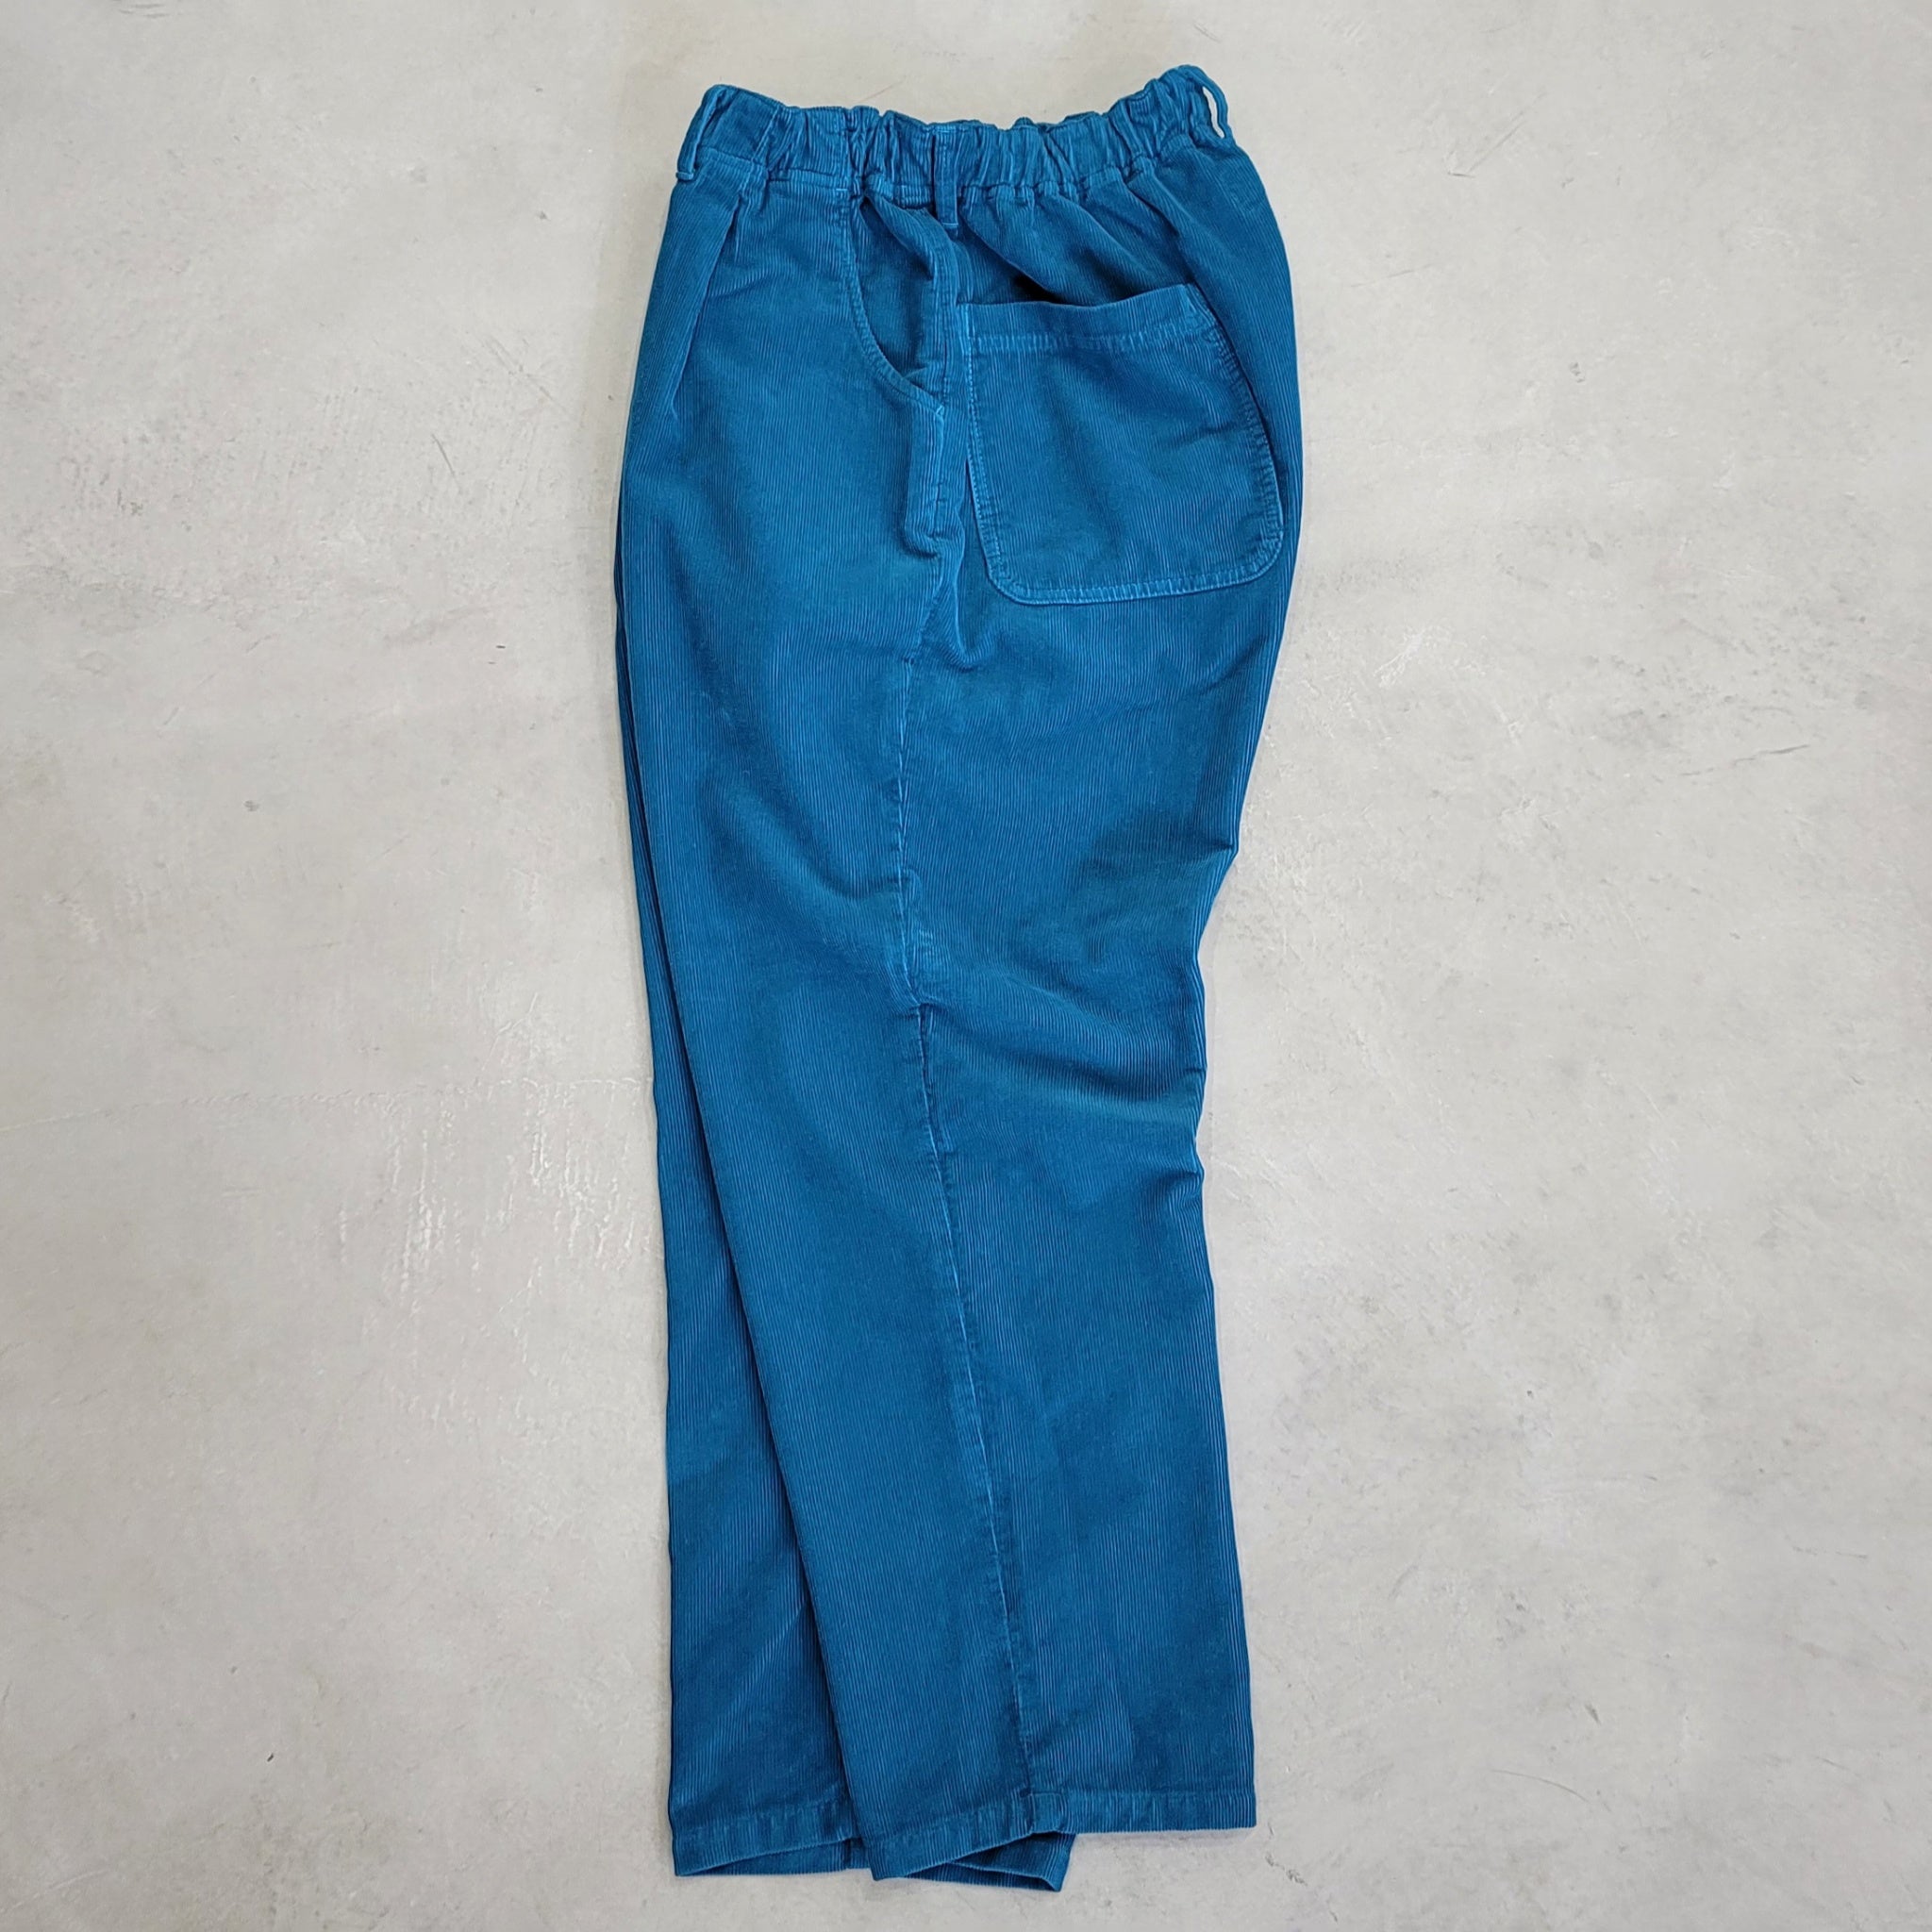 No:VOO-1194_TURQUOISE | Name:CORDUROY EZ | Color:Turquoise【VOO_ヴォー】【入荷予定アイテム・入荷連絡可能】